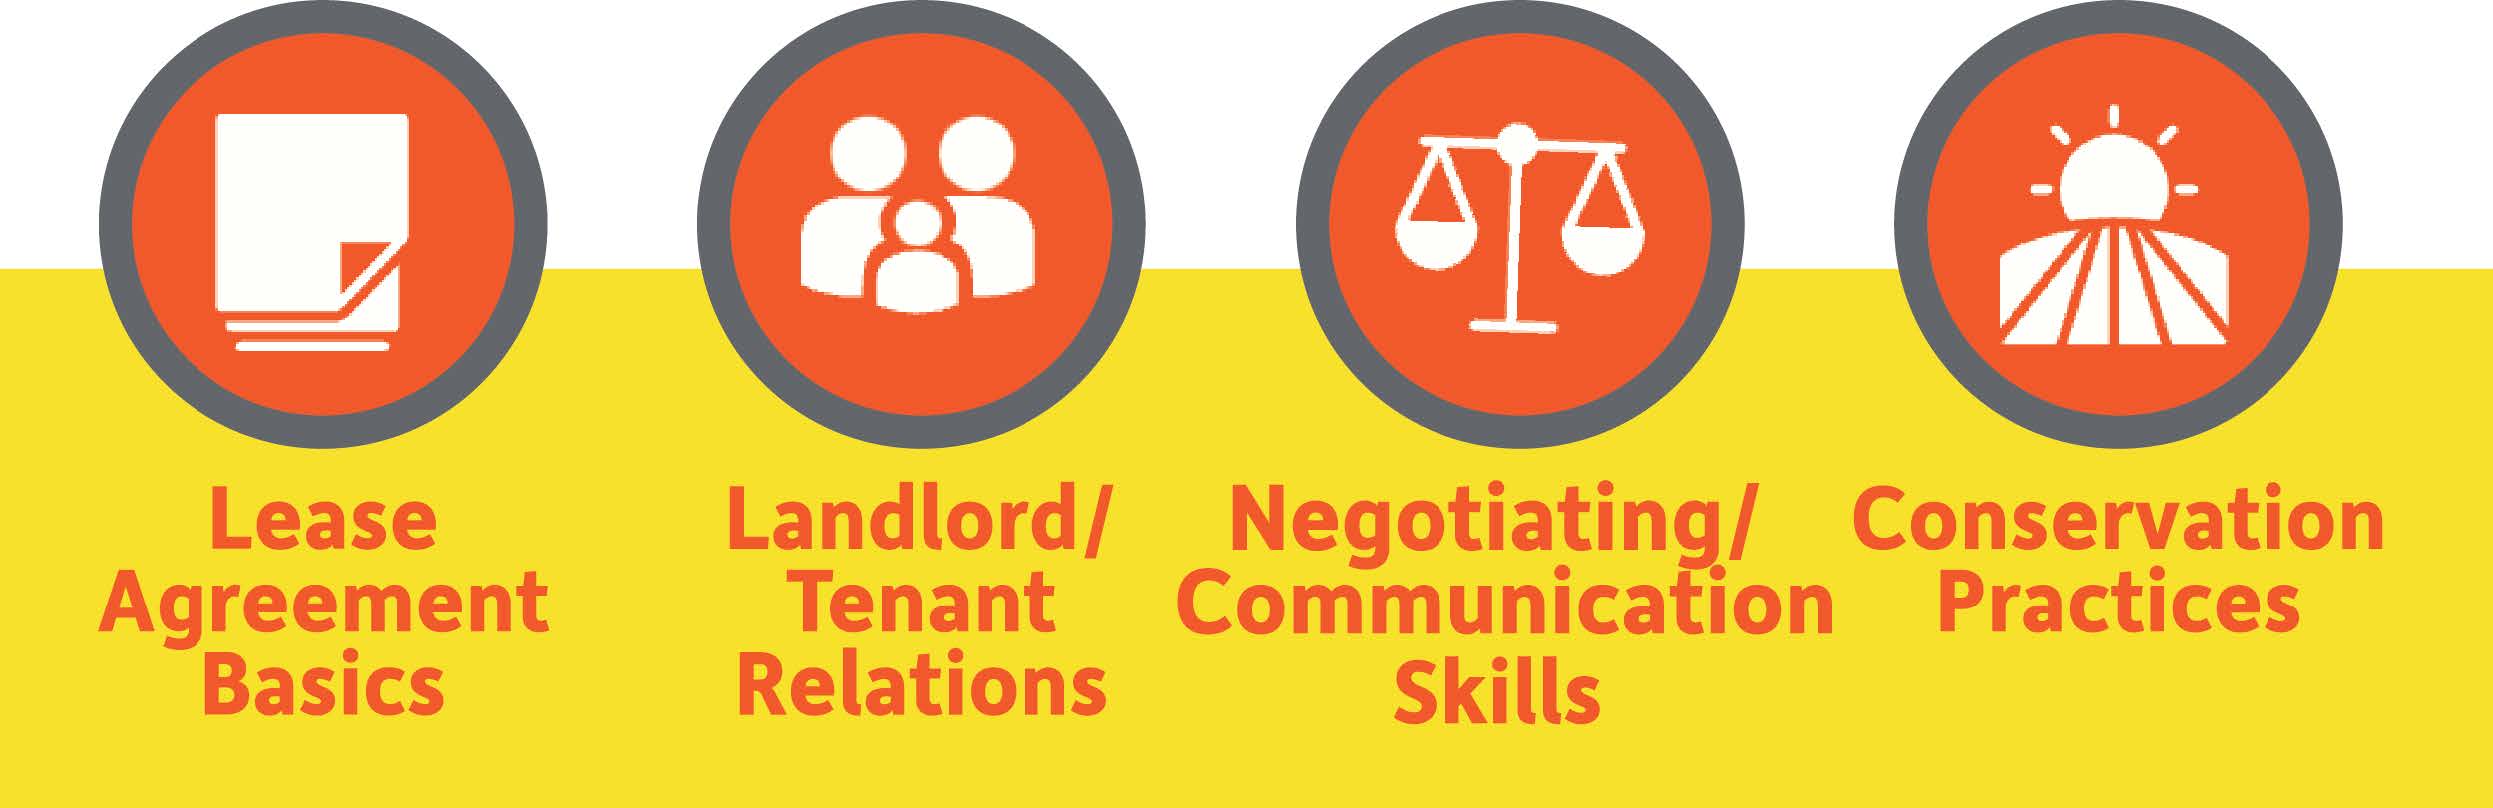 The Power of Negotiation & Communication 